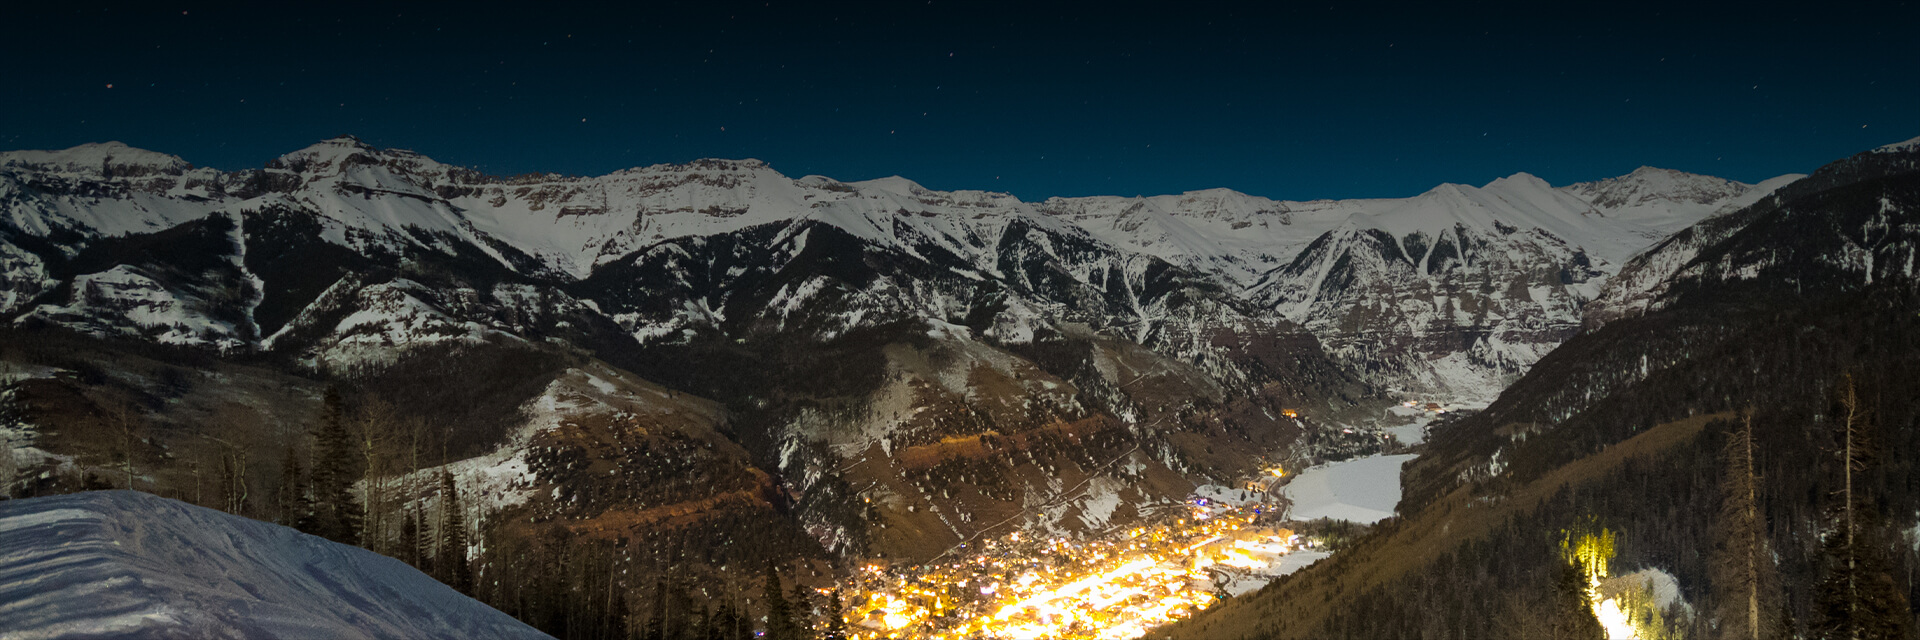 the town with lots of lights at night with snow covered mountains in the distance